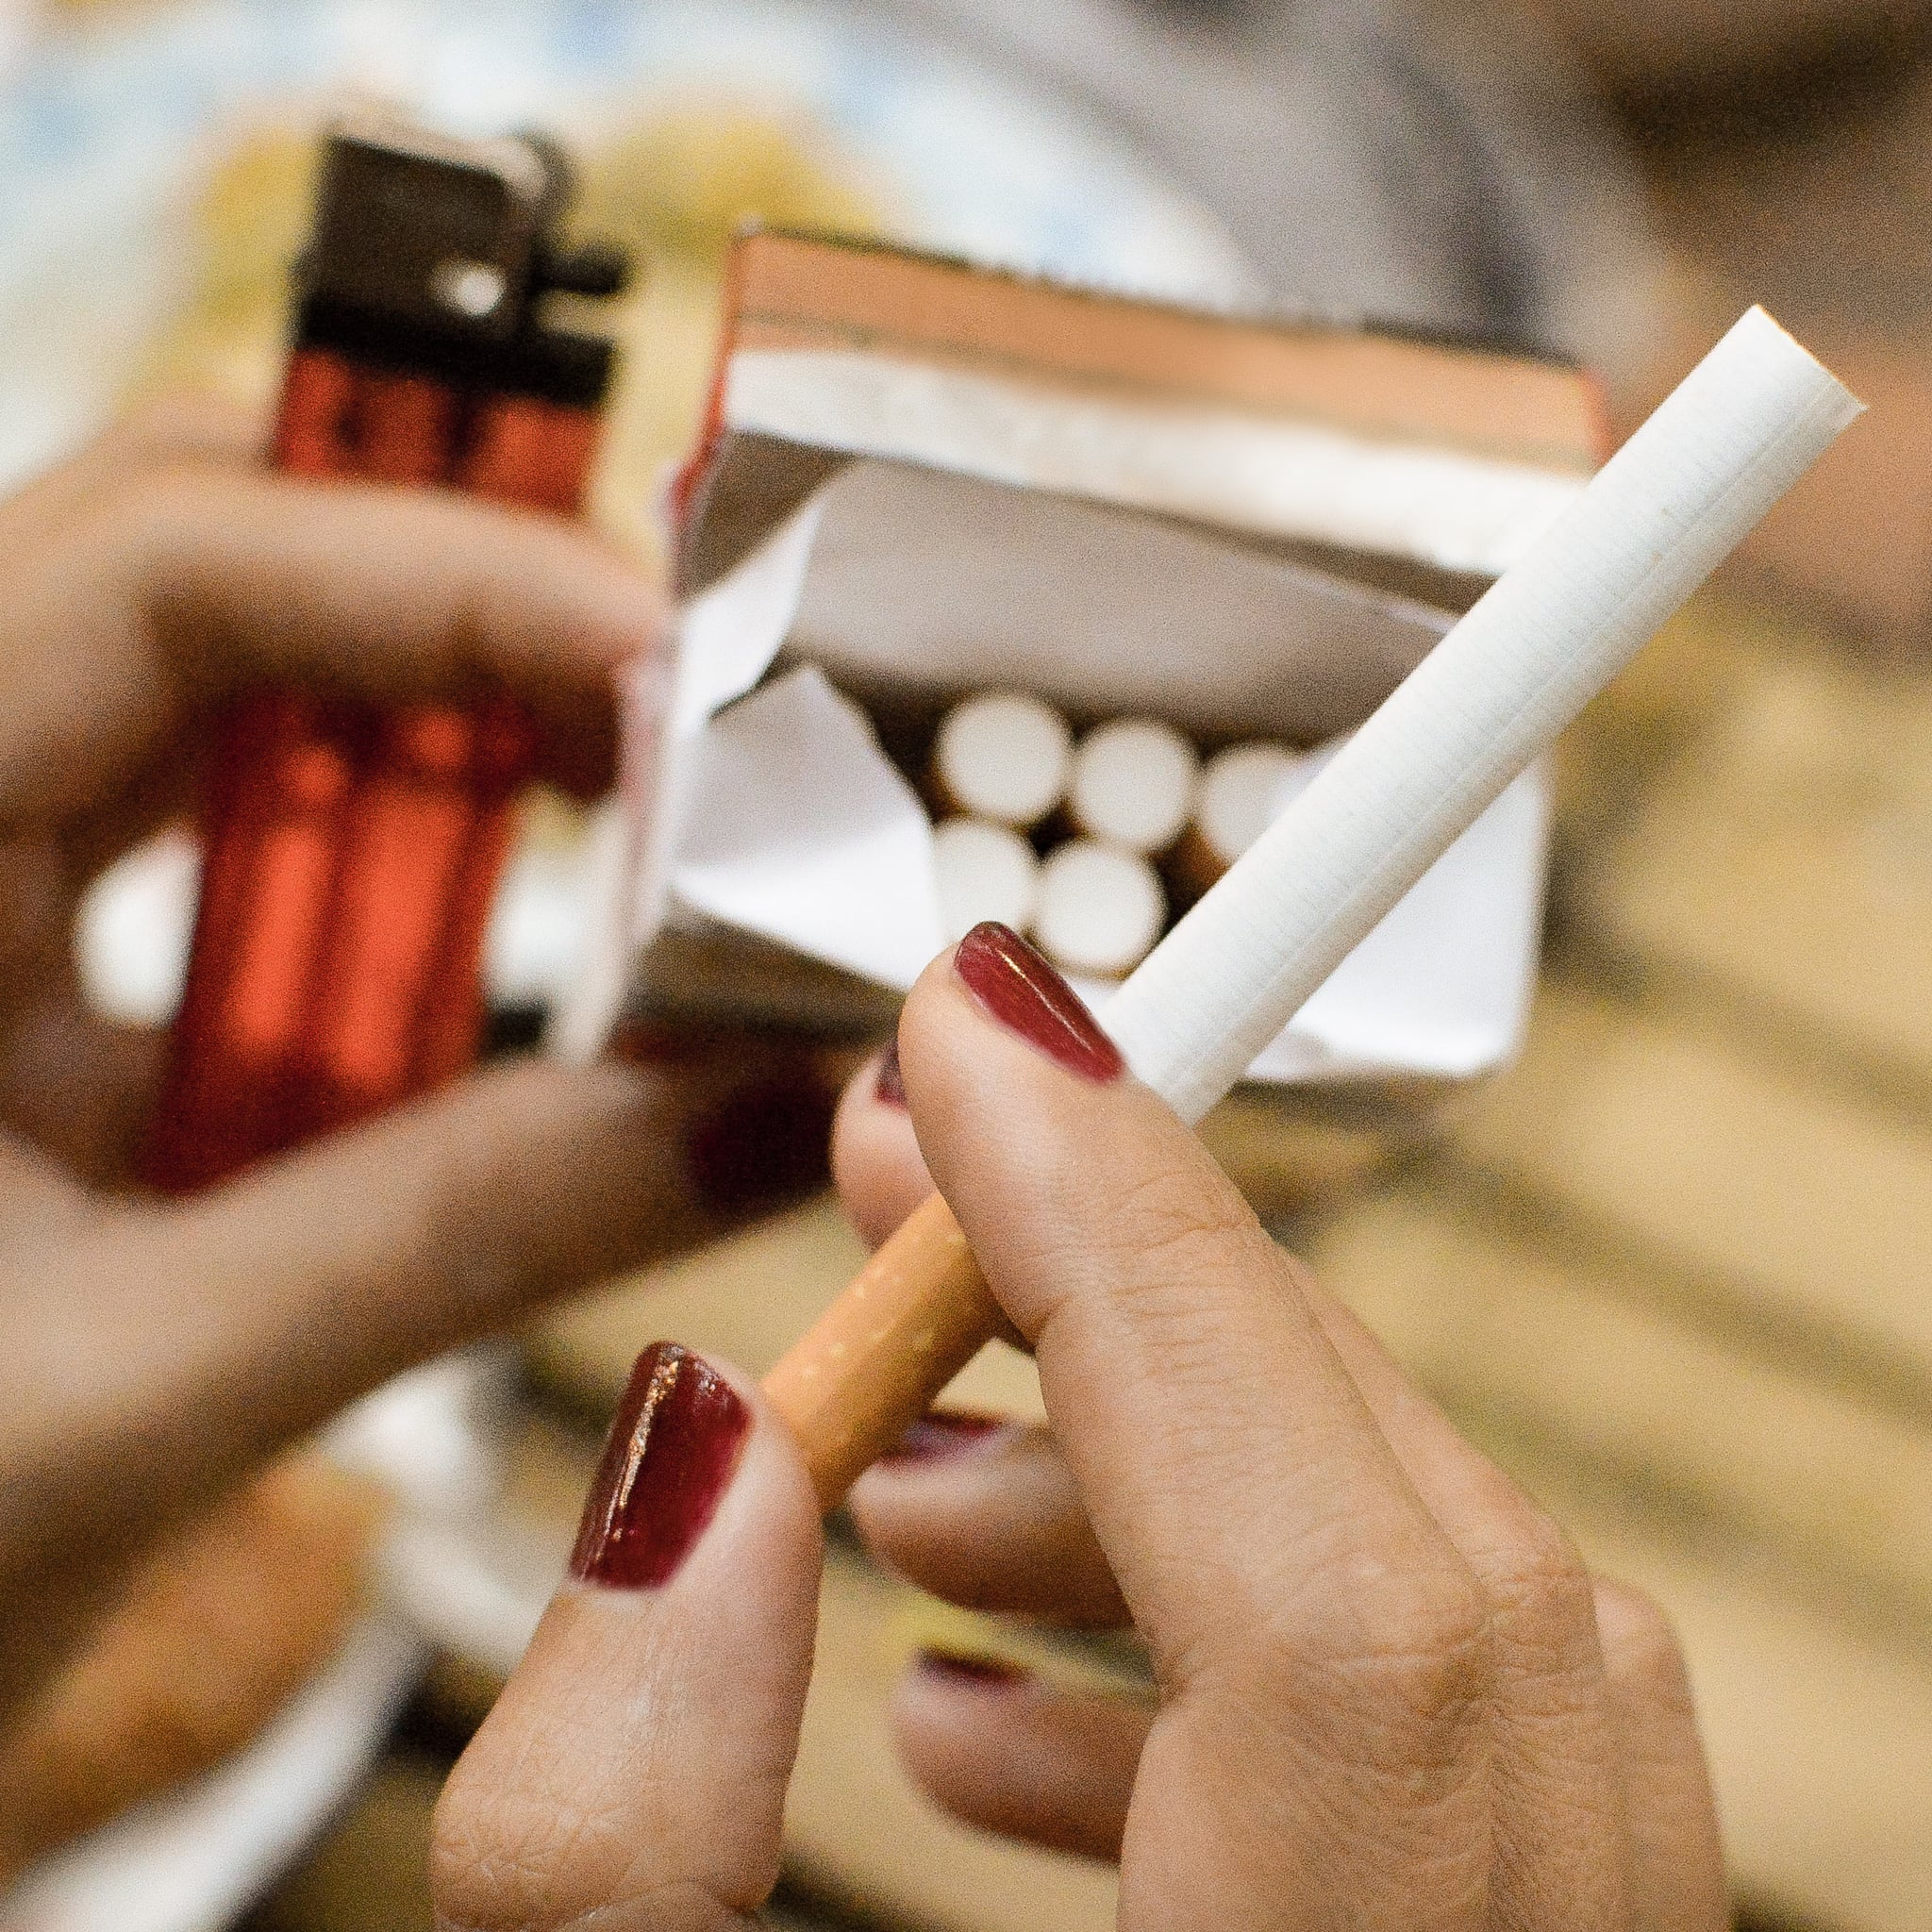 how smoking cigarettes affects your skin over time